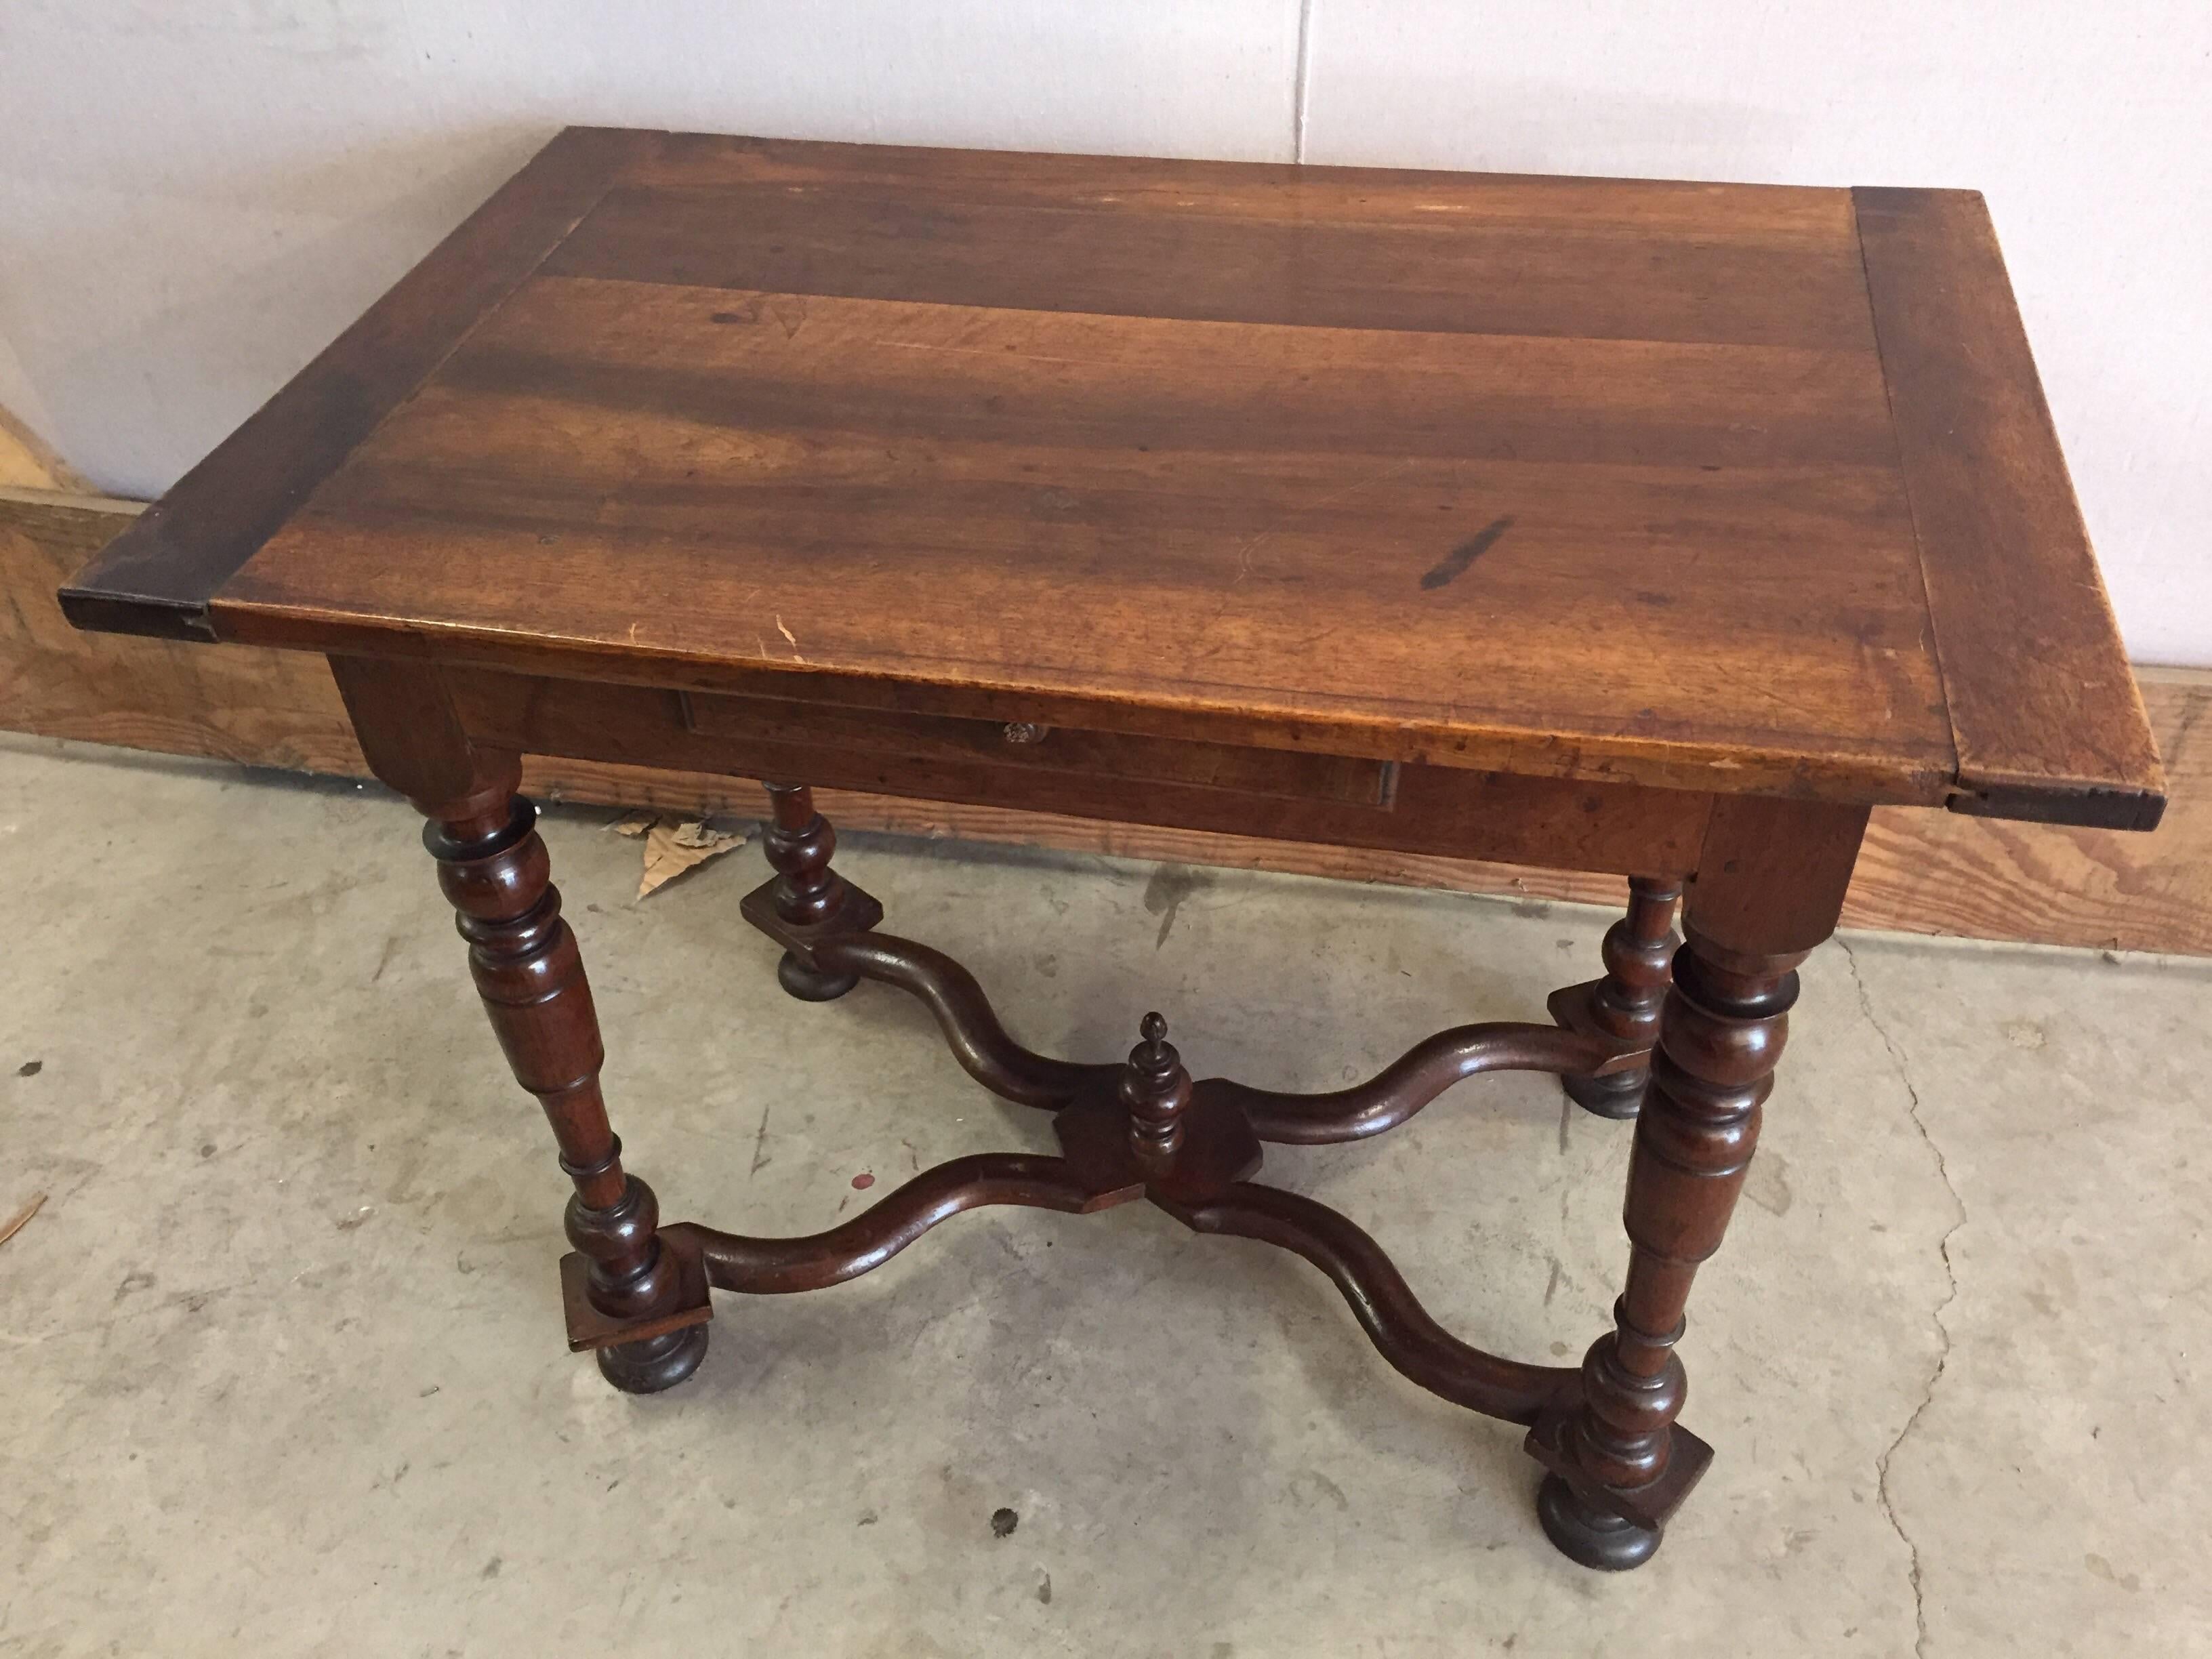 18th century walnut Louis XIV table with one drawer, and rich color with nice patina. Legs and stretcher are
very stable and sturdy.